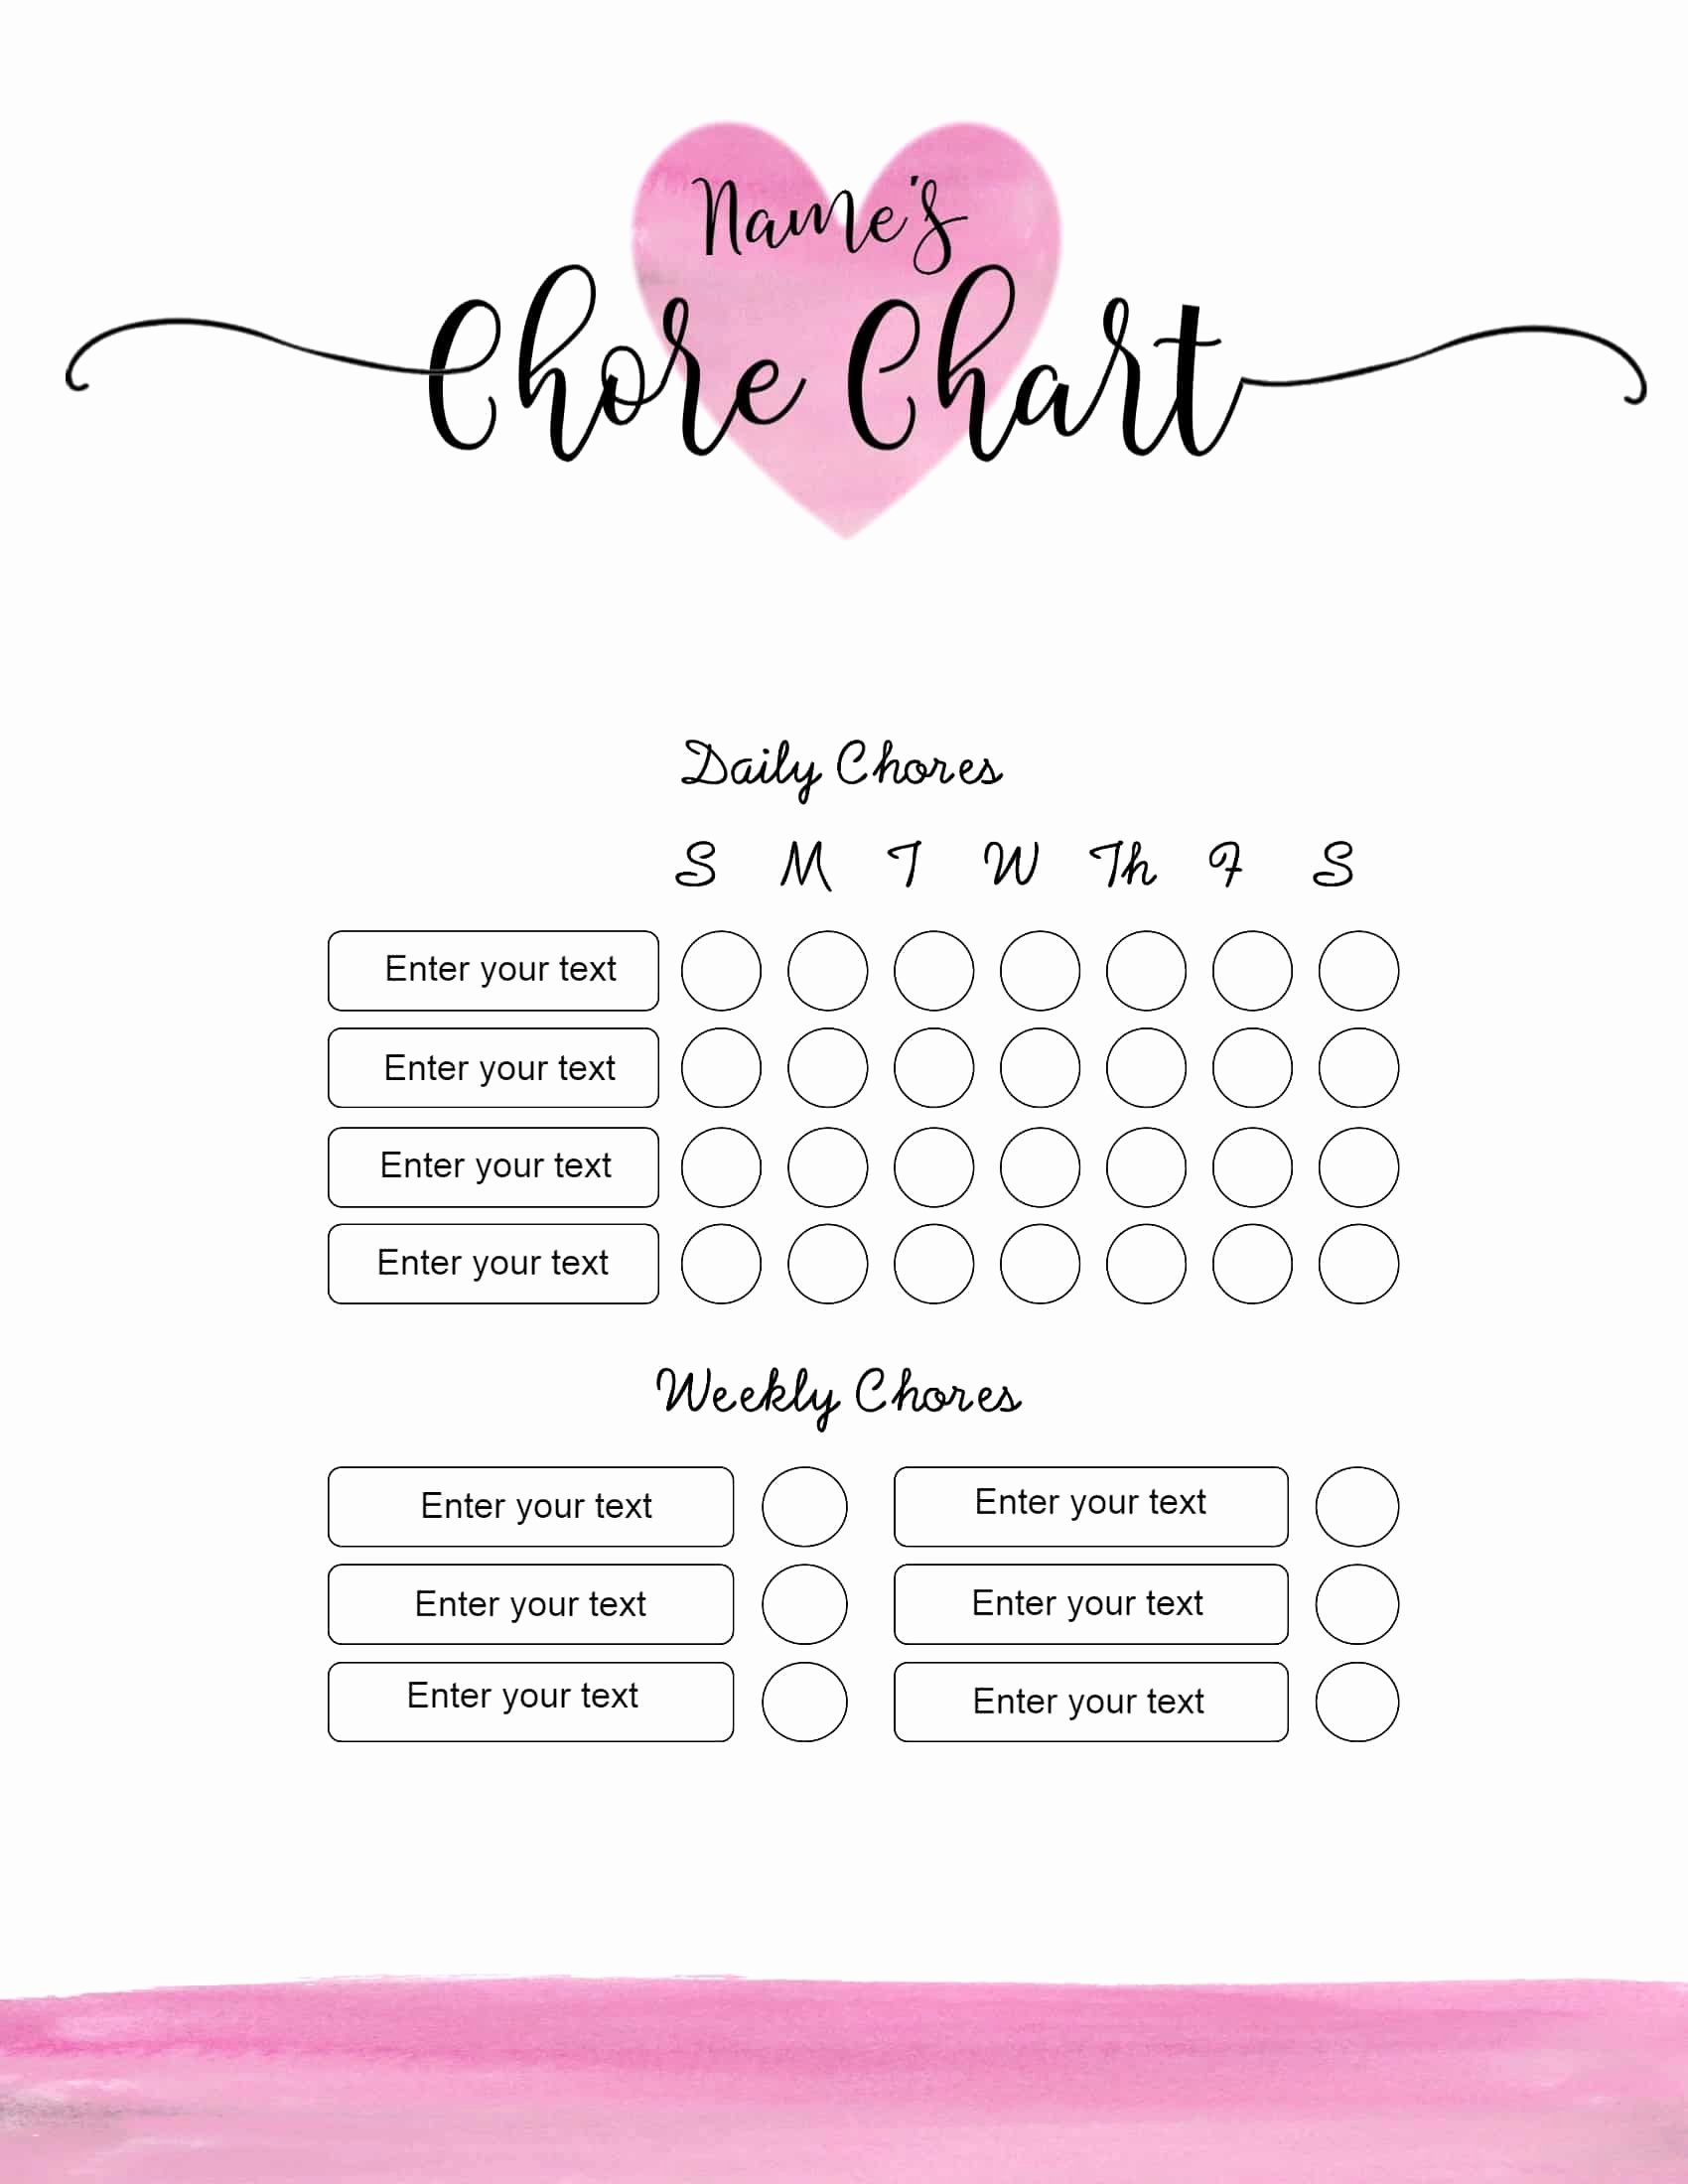 Chore Chart for Adults Templates Luxury Free Chore Chart Template